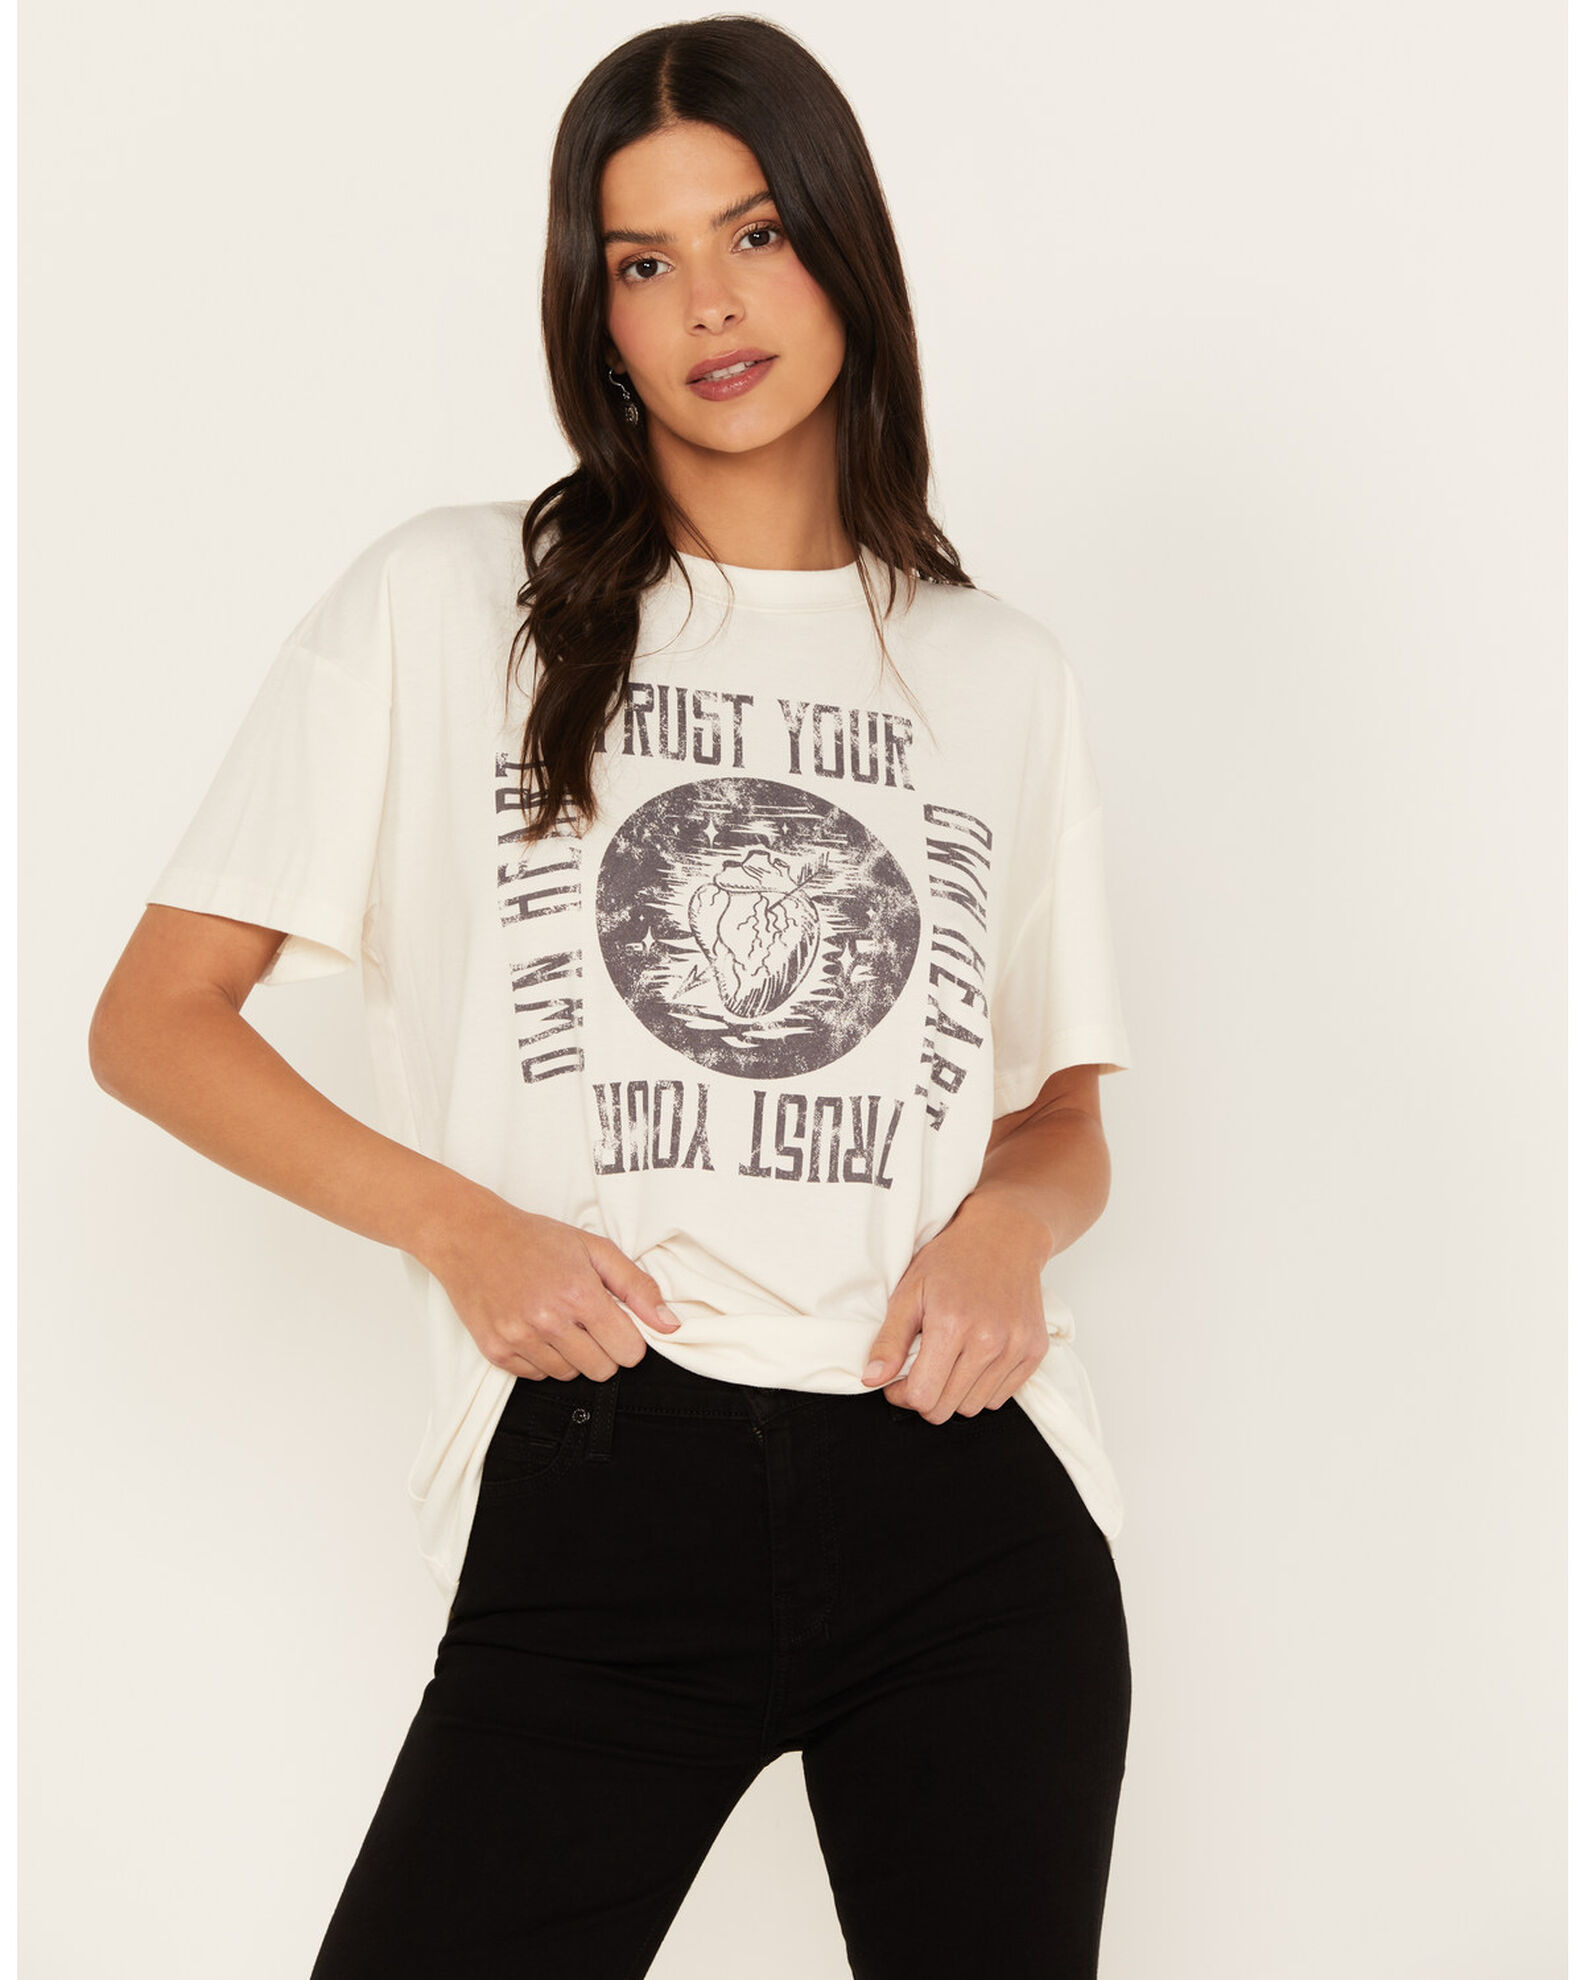 Cleo + Wolf Women's Trust Your Own Heart Oversized Graphic Tee